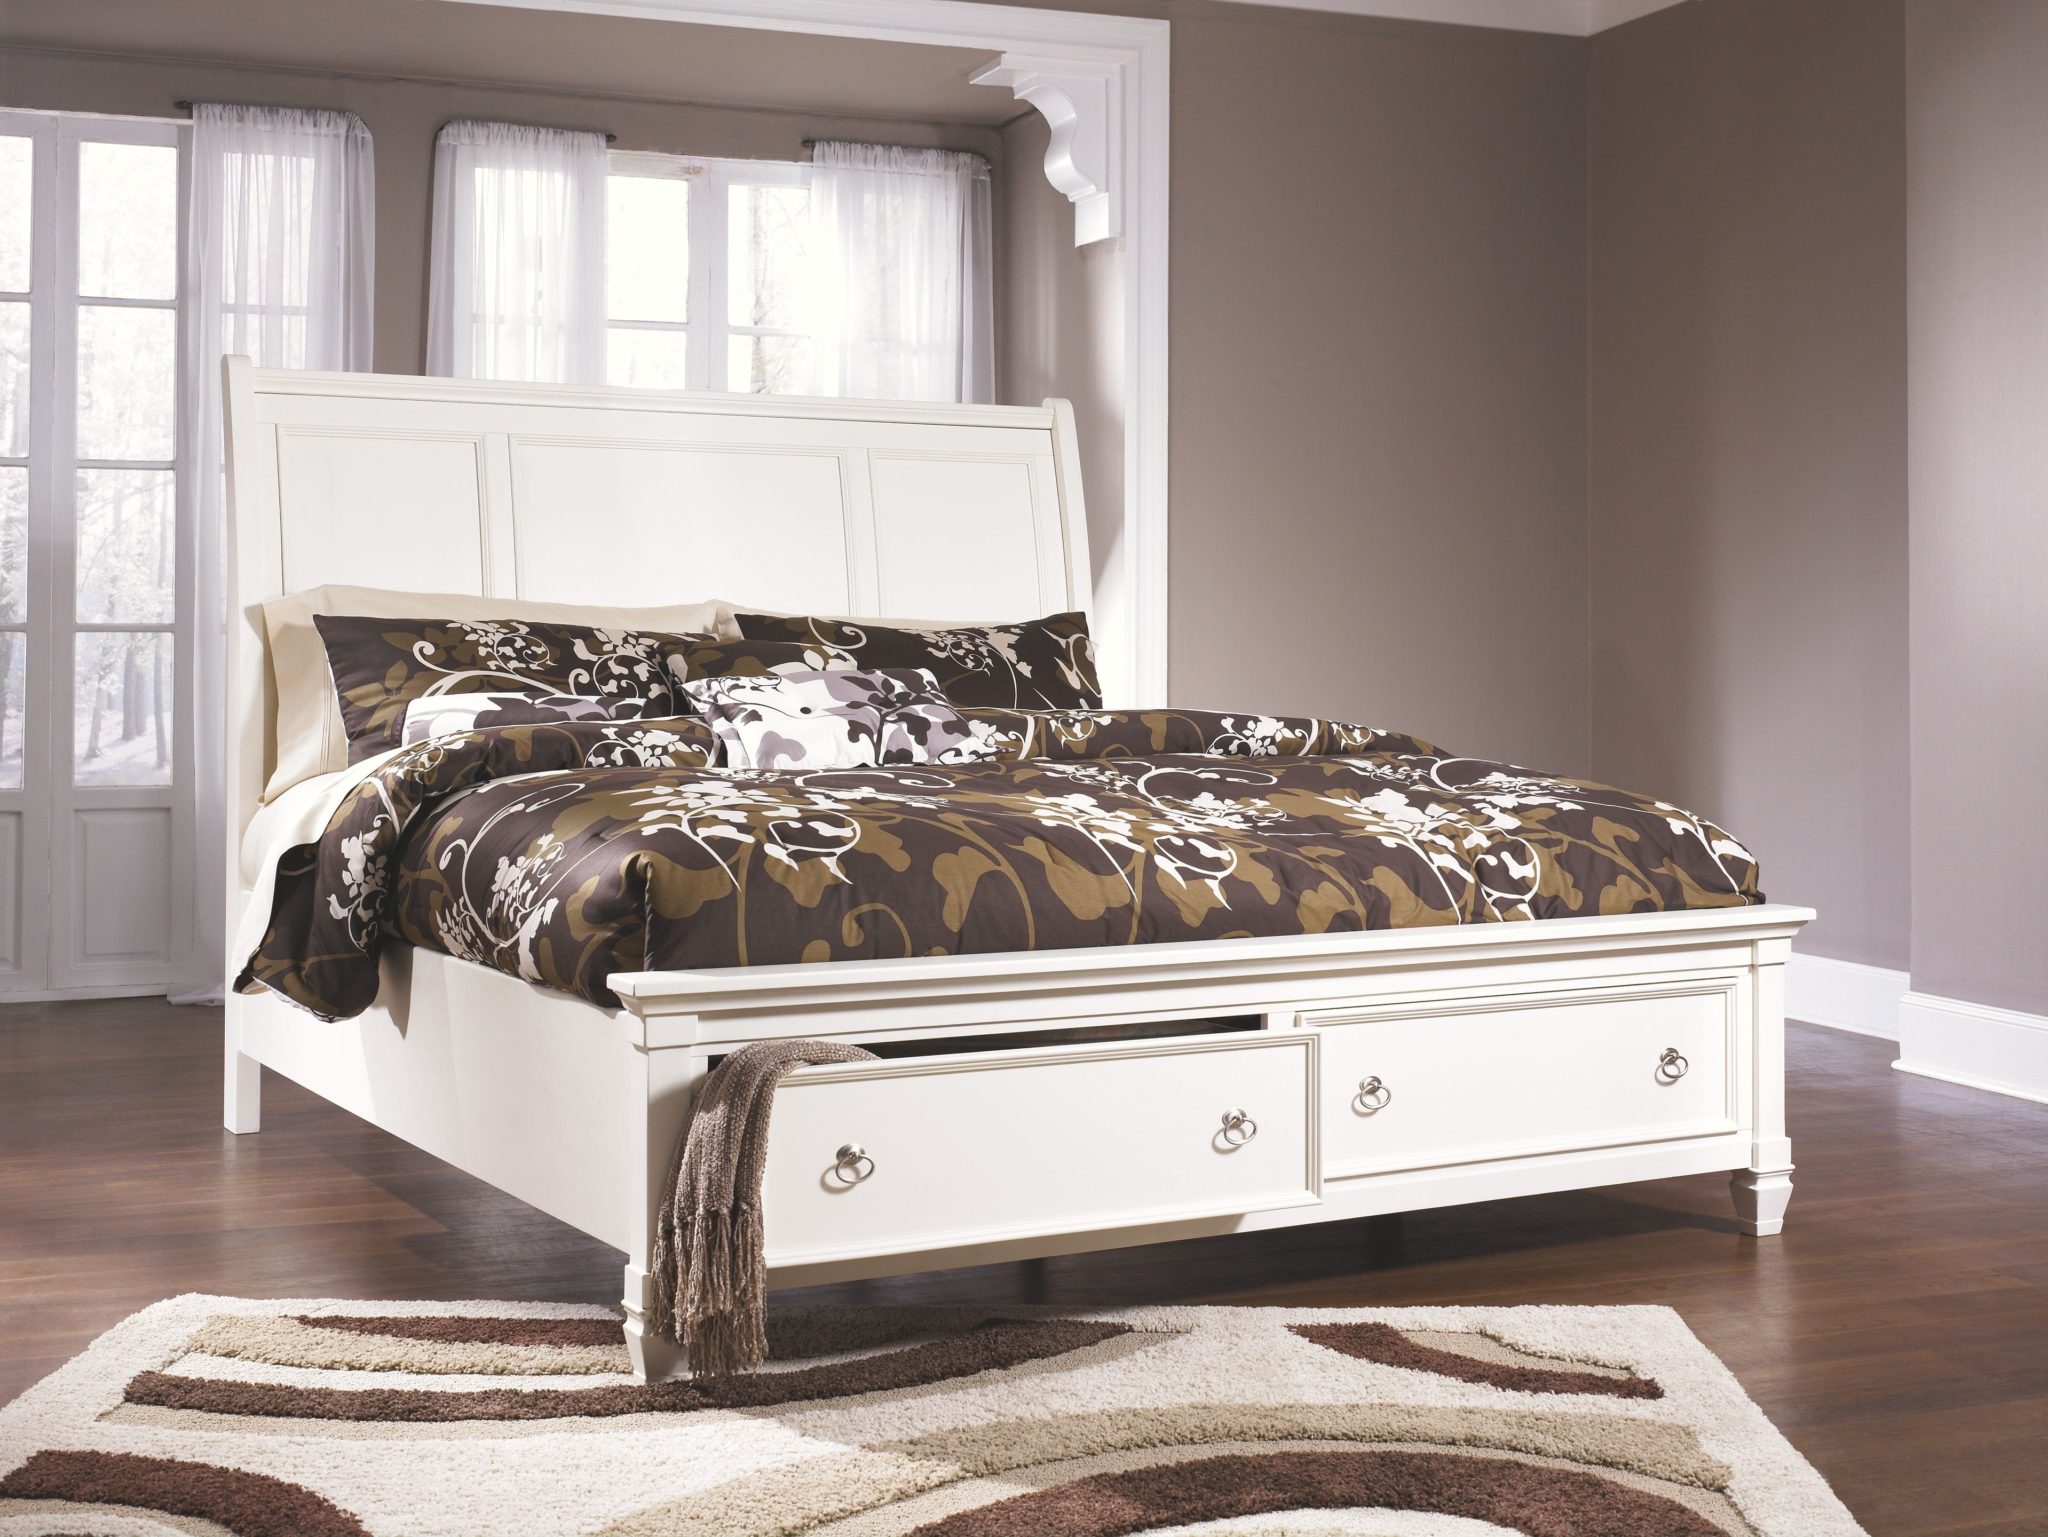 Ashley Furniture - Prentice - White - King Sleigh Bed with 2 Storage